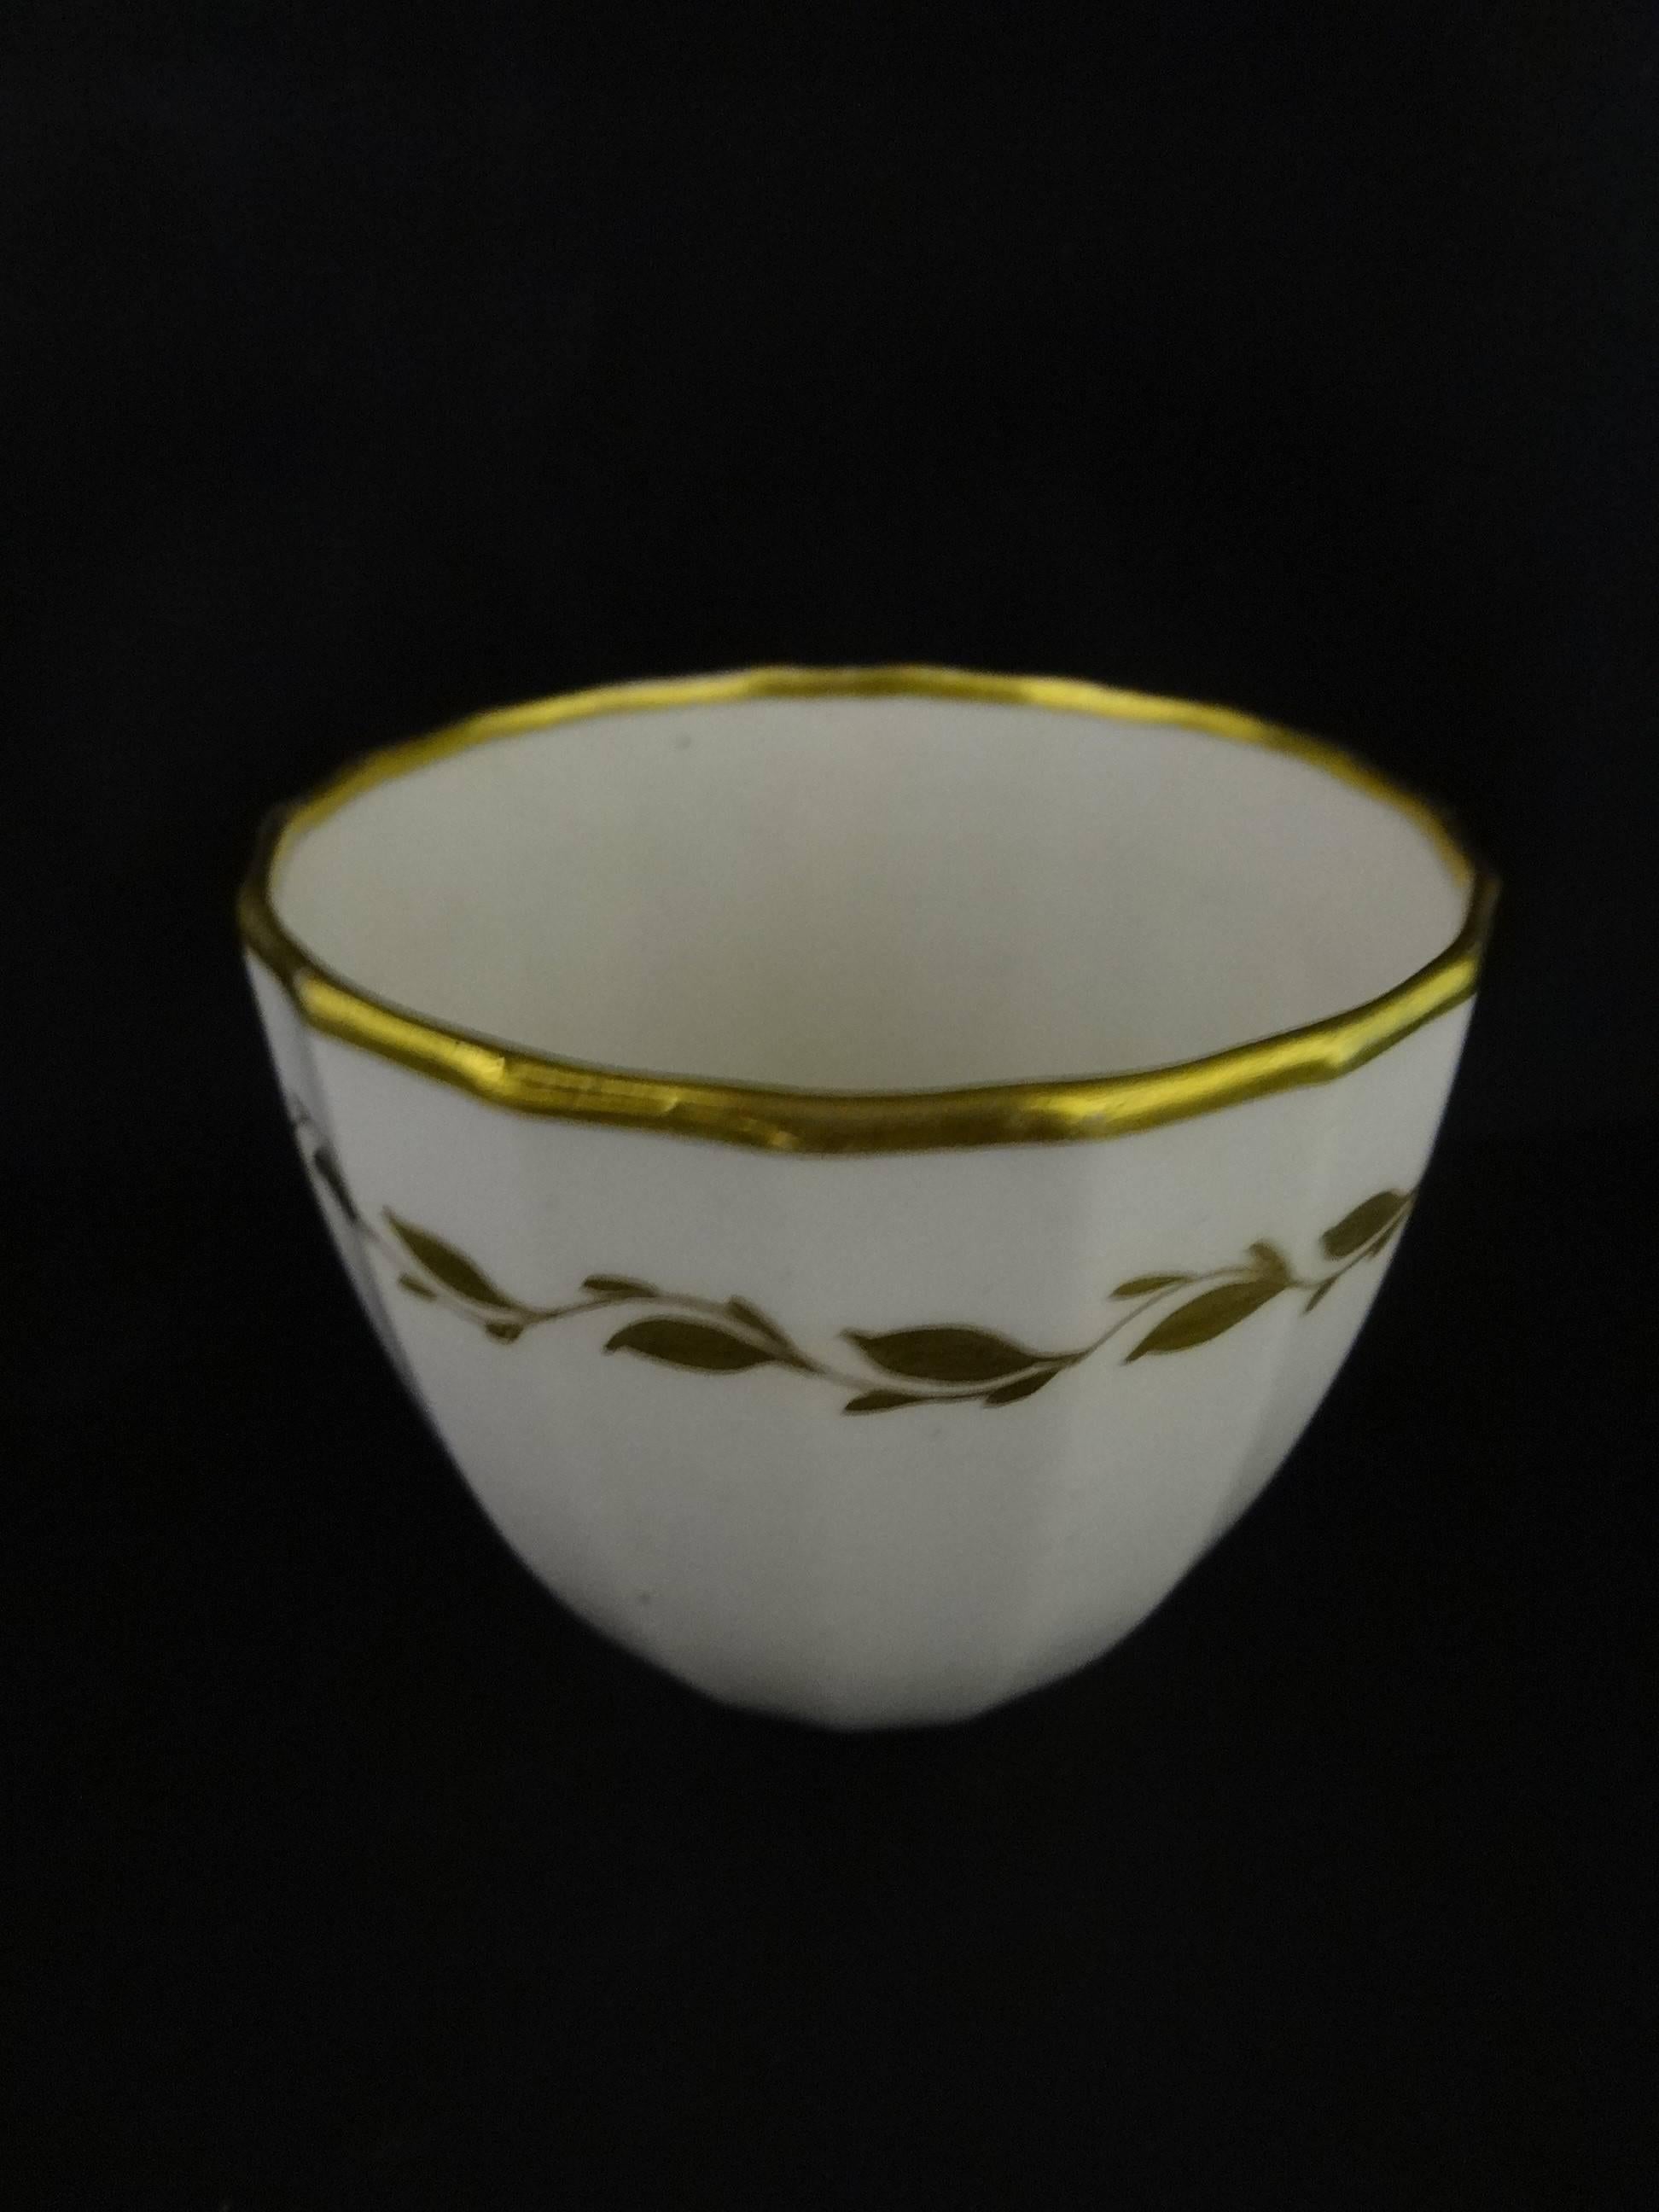 19th Century Derby Fluted Porcelain Cup and Saucer Pattern 530, Puce Mark